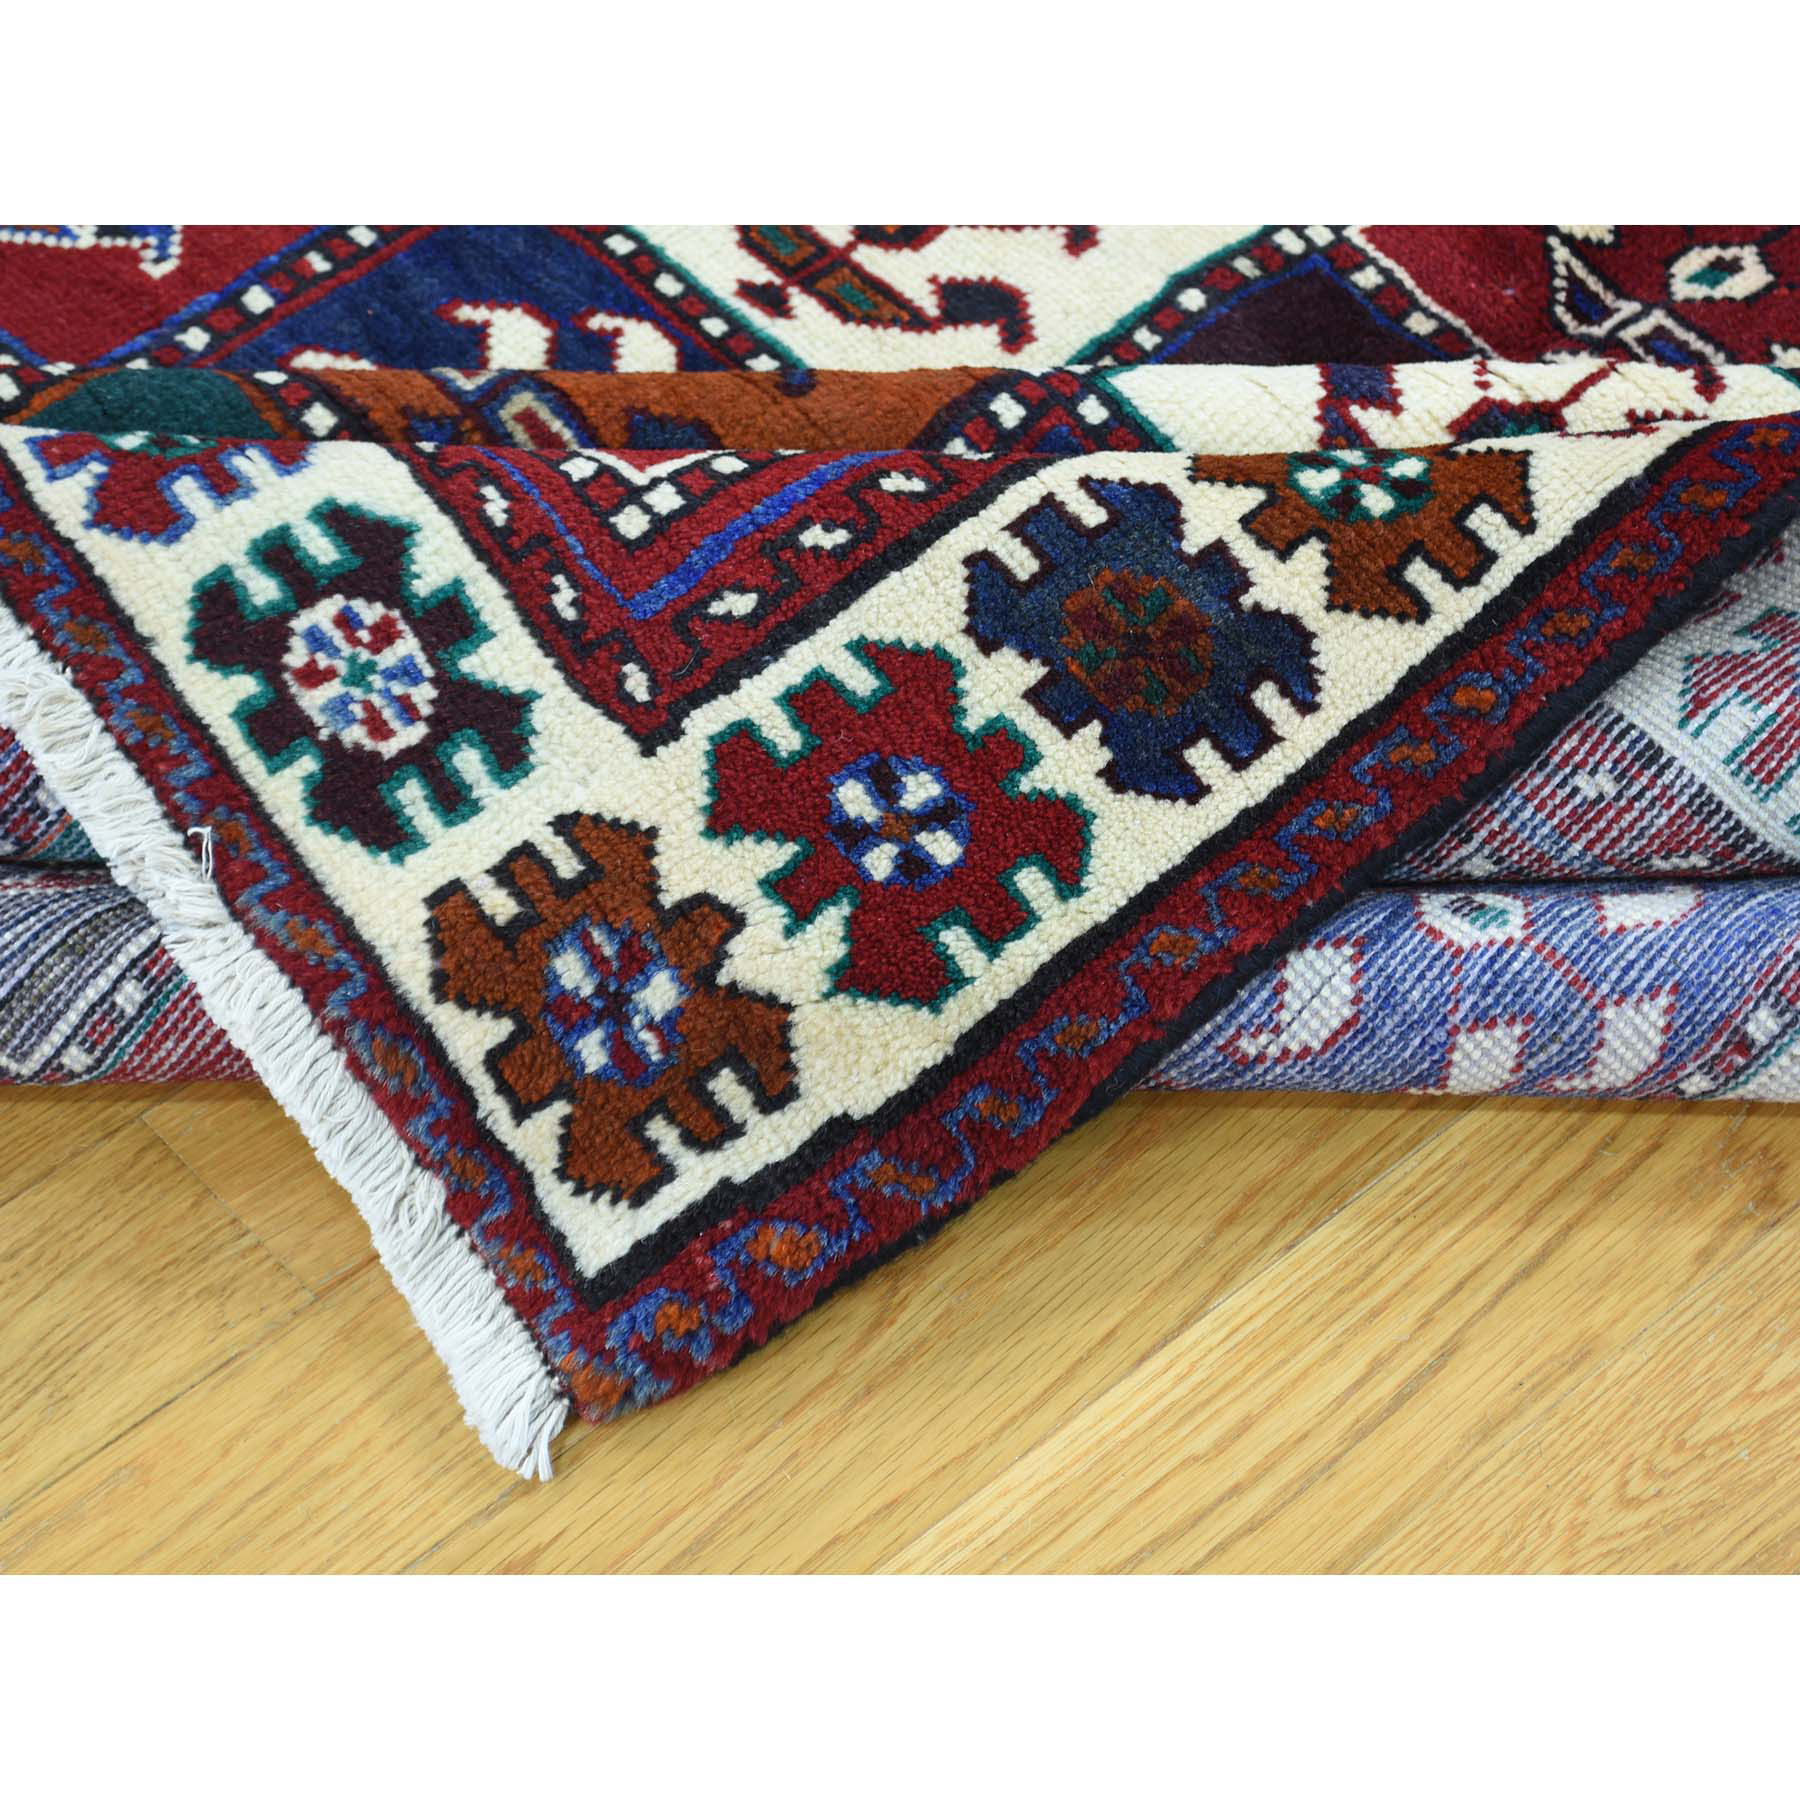 4-10 x9-2  On Clearance Semi Antique Persian Bakhtiari Wide Runner Hand-Knotted Rug 